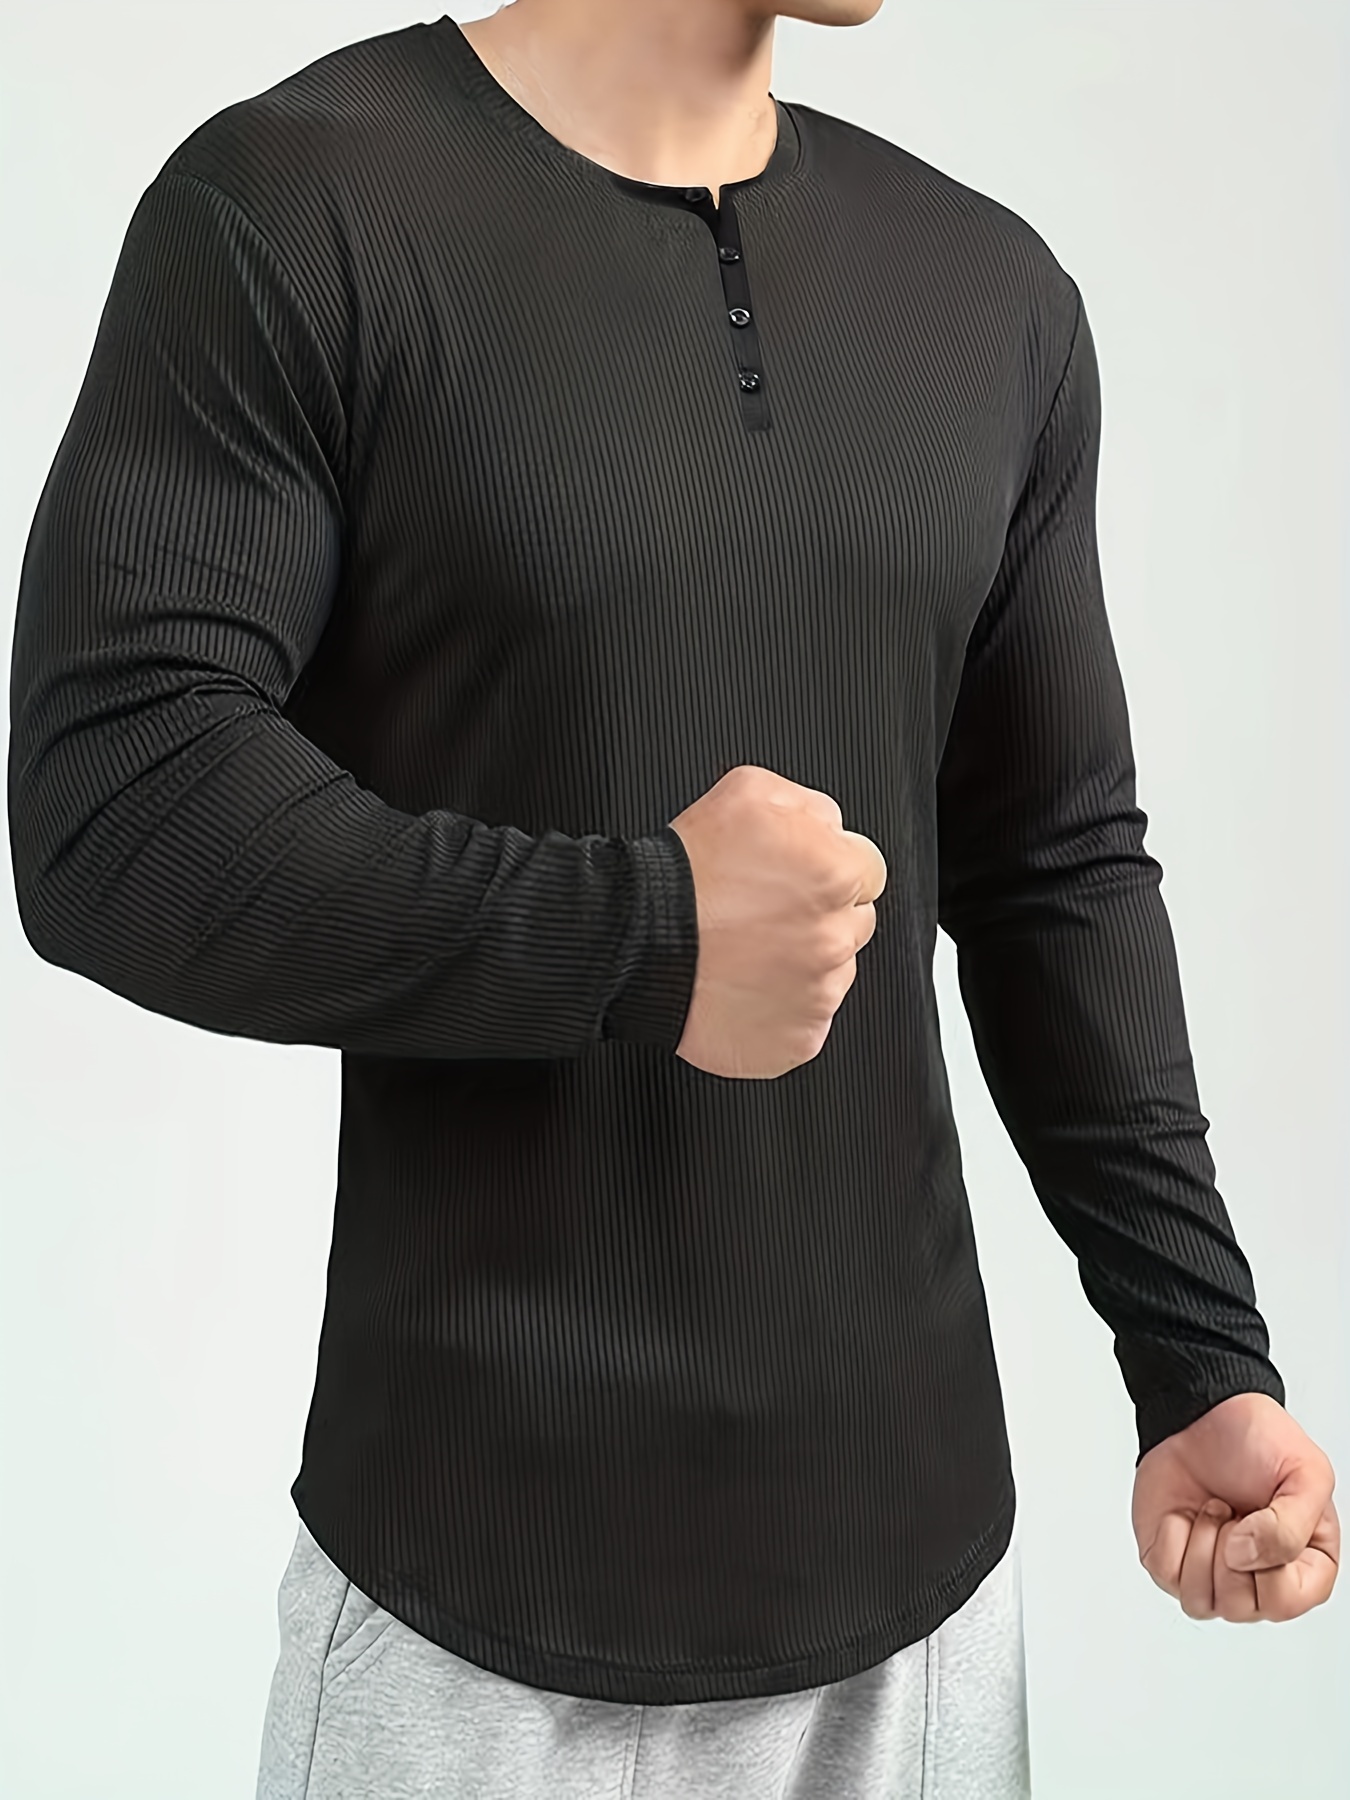 2DXuixsh Pack Of Turtle Neck Top for Men Mens Fashion Cotton T Shirt Sports  Ffitness Outdoor Solid T Shirt Tight Long Sleeve Shirt Space Apparel Cotton  Black Xxl 